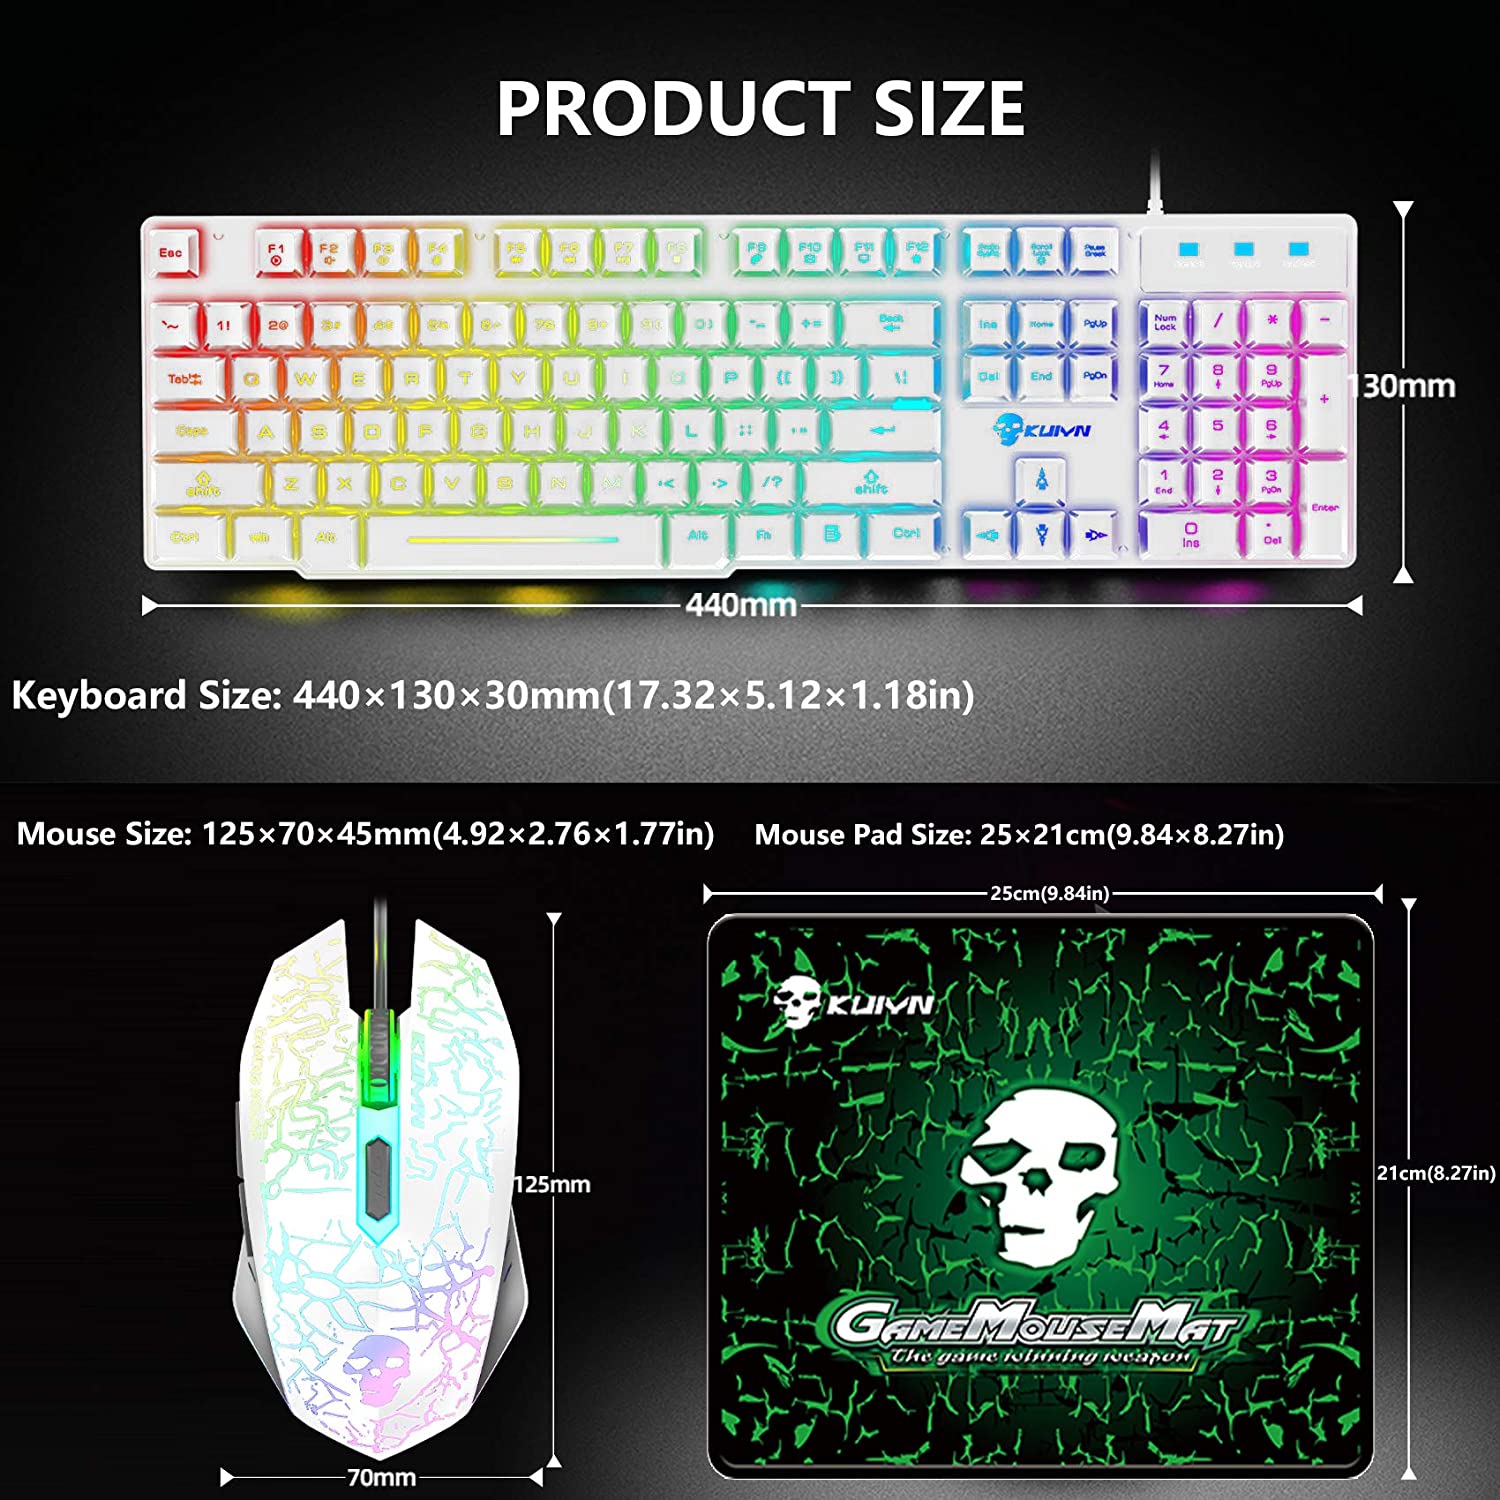 KUIYN T6 Wired Keyboard Mouse Combo 12 Chroma RGB Backlit Mechanical Feel Gaming Keyboard+2400DPI 6 Buttons LED Gaming Mouse+Mouse Pad